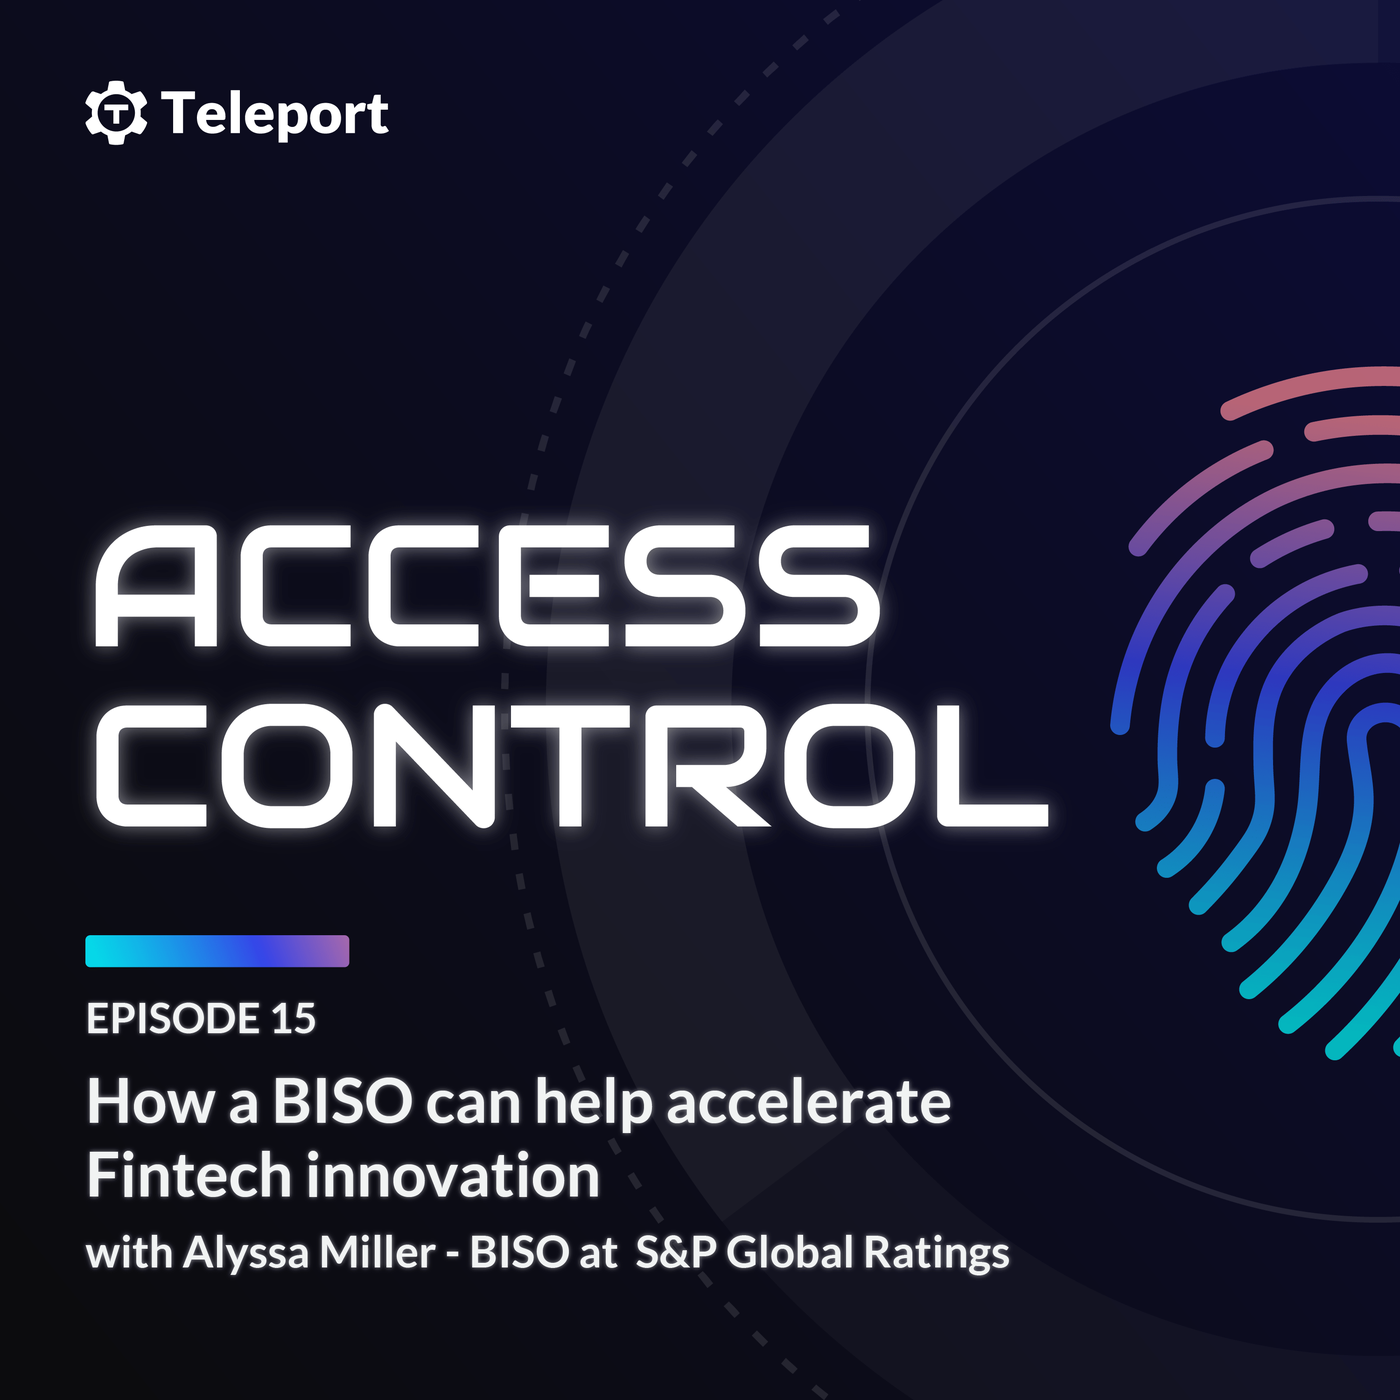 How a BISO can help accelerate Fintech innovation